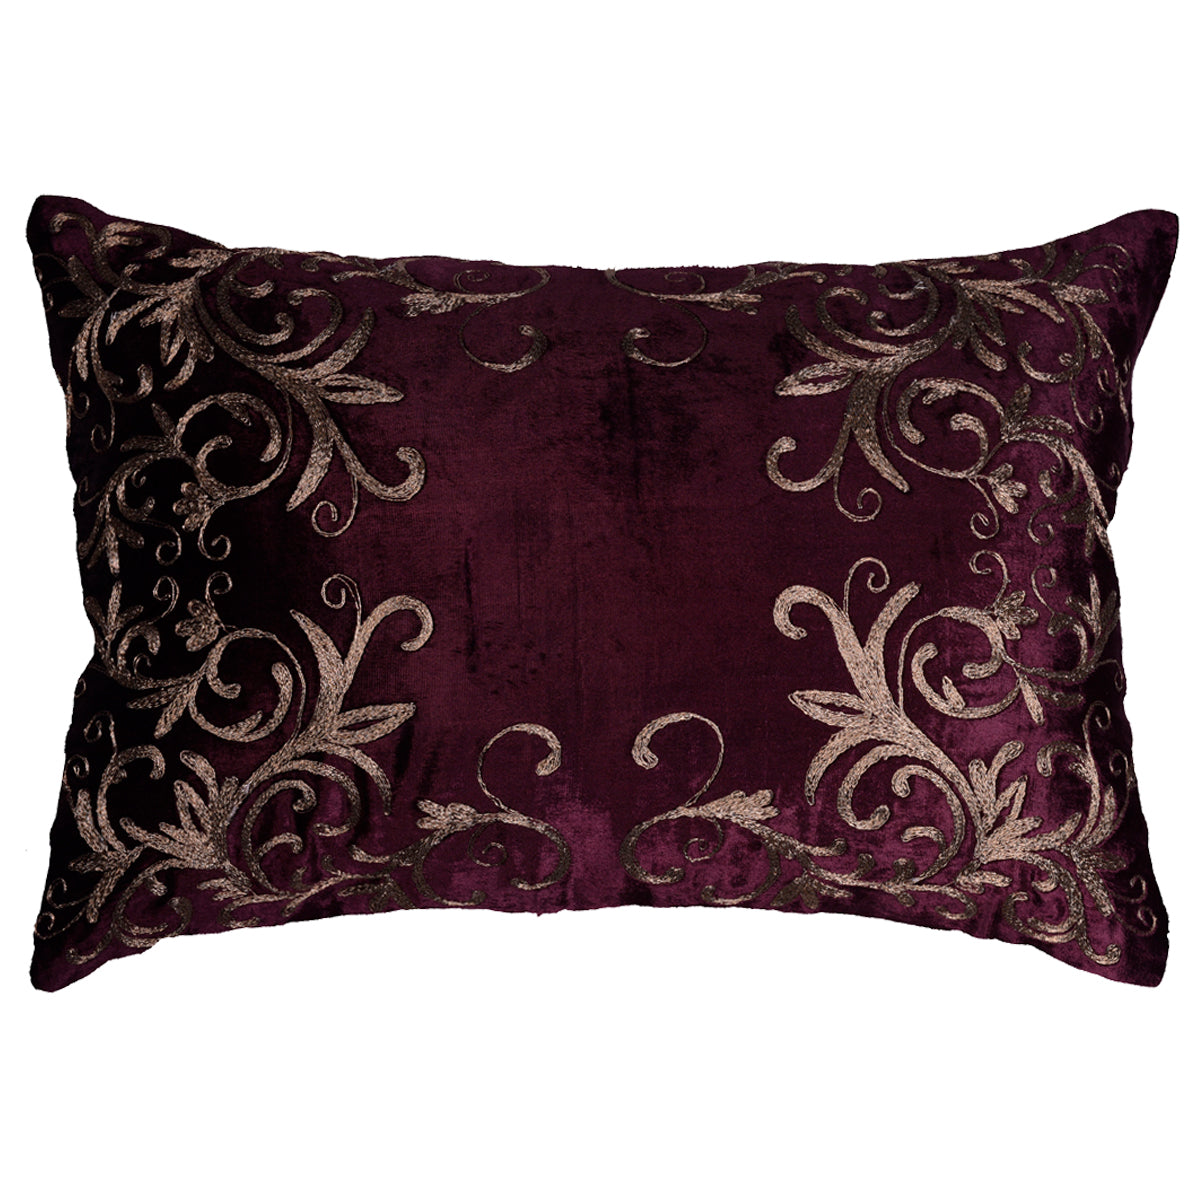 Throw Pillow Covers - Set of 4, 18 x 18 inches